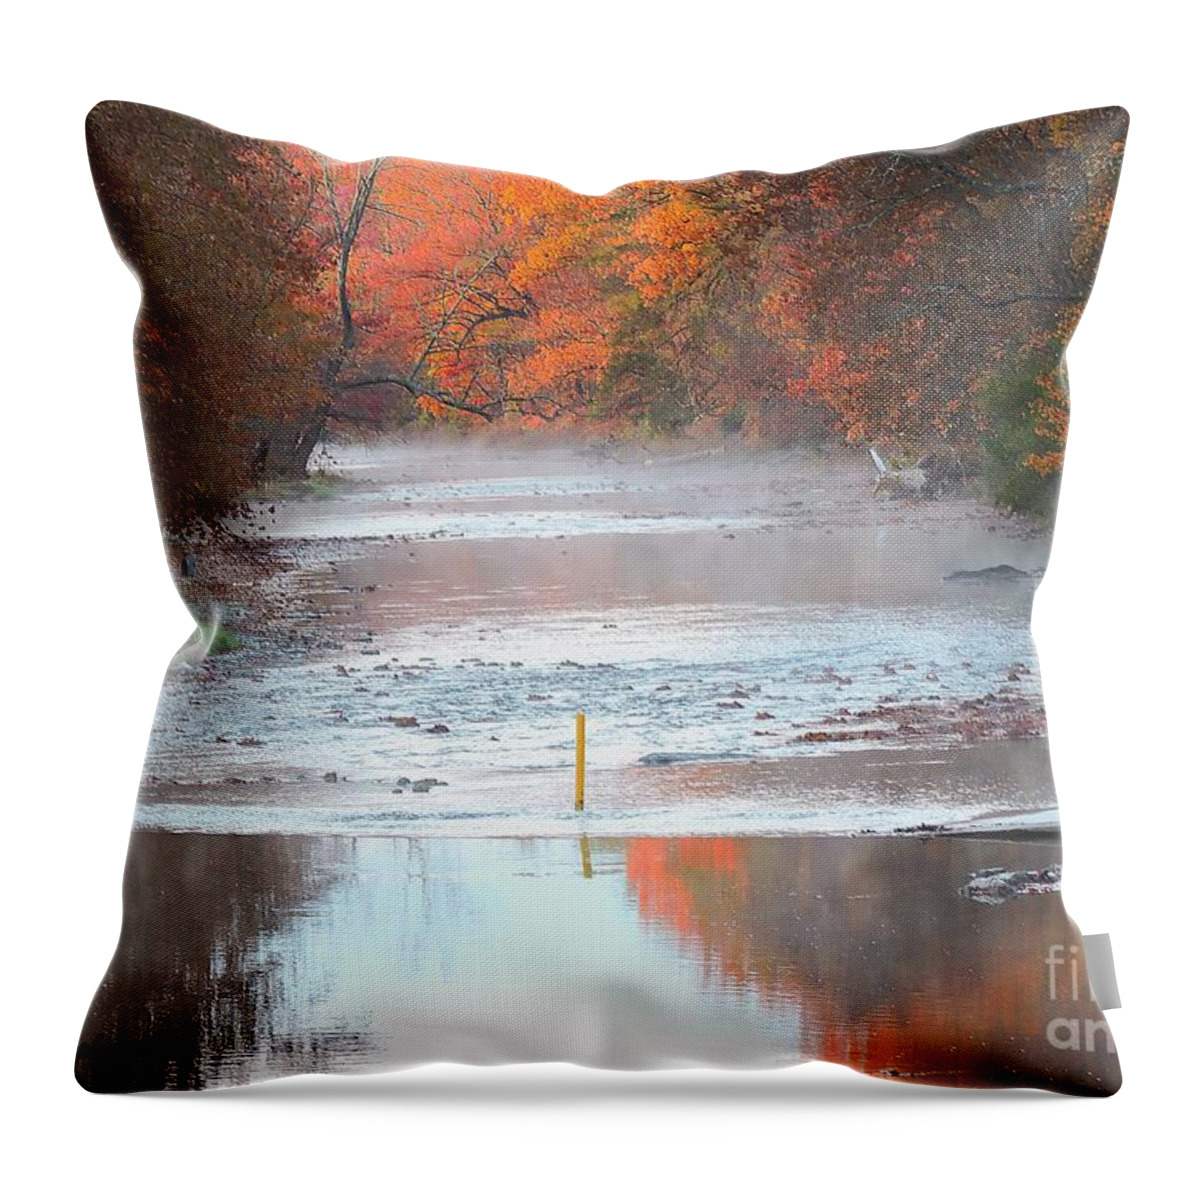 Mist Throw Pillow featuring the photograph In The Early Morning Mist by Tami Quigley